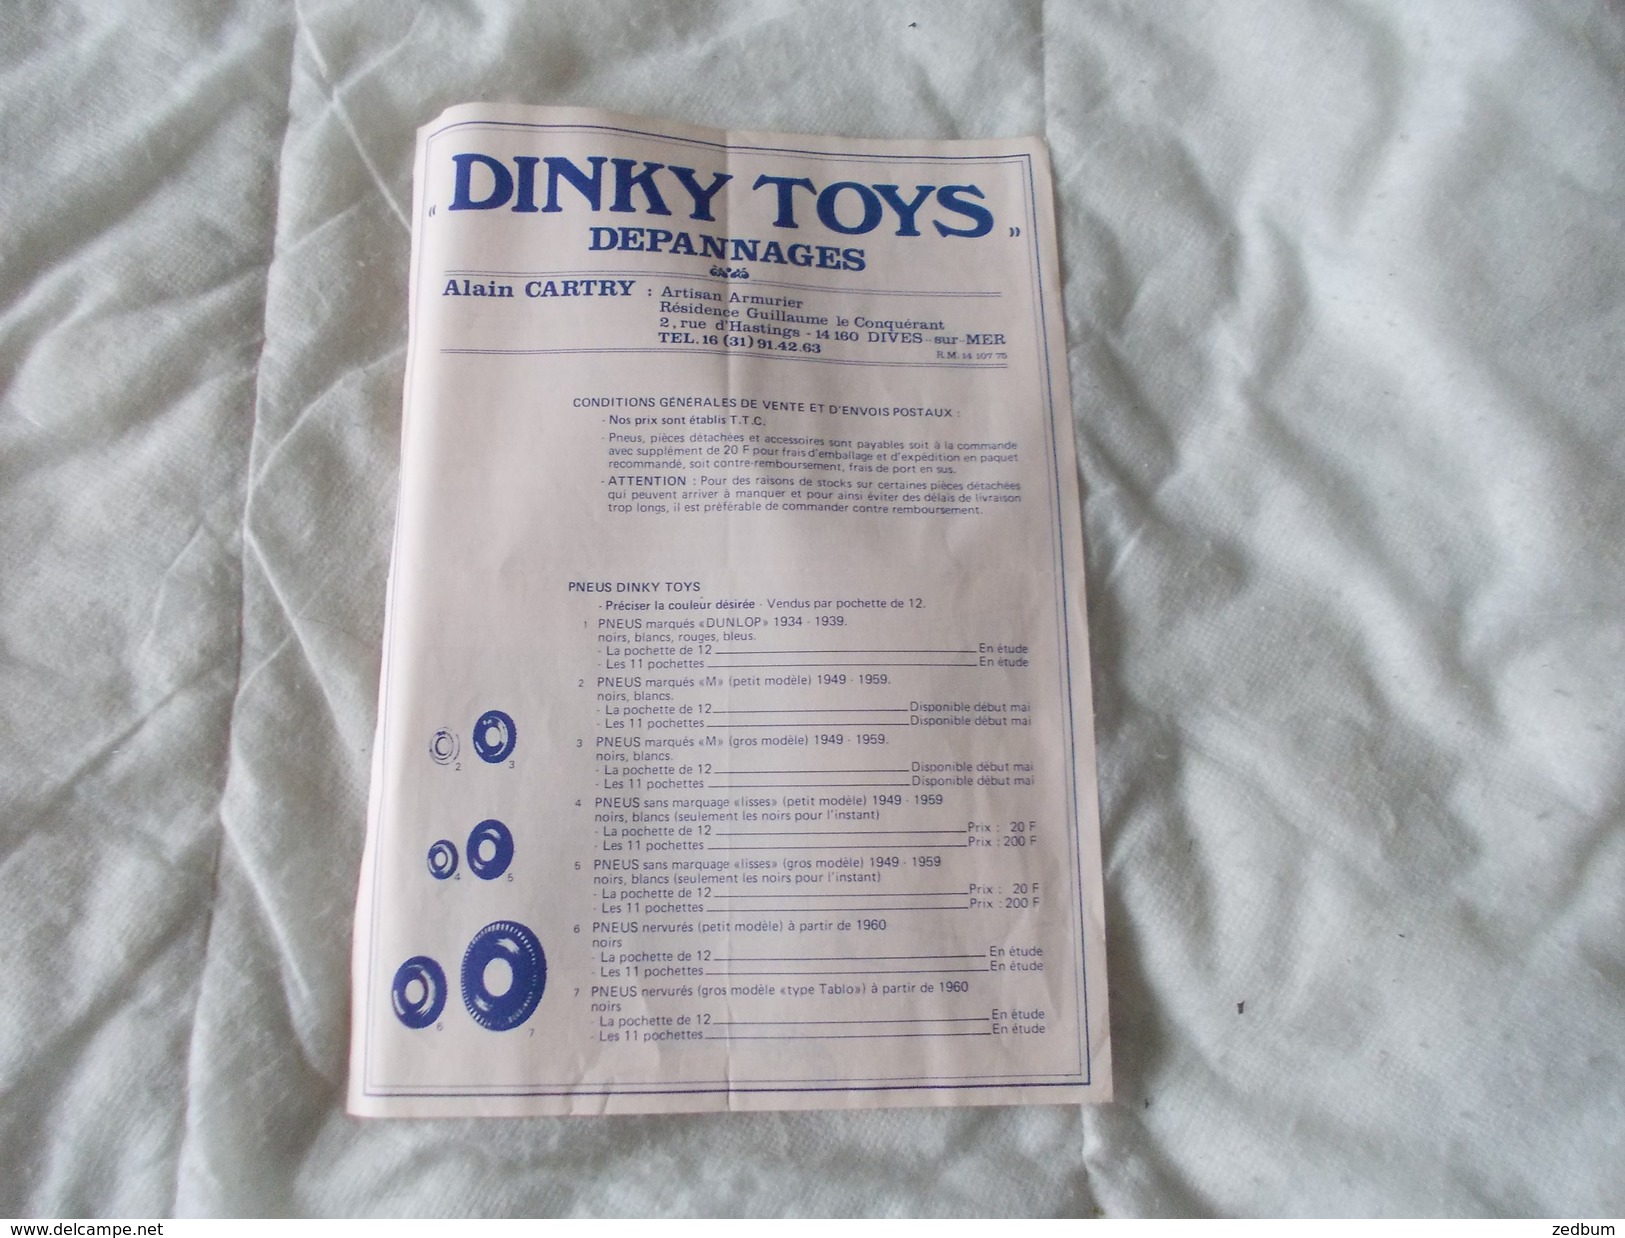 Dinky Toys Depannages - Model Making